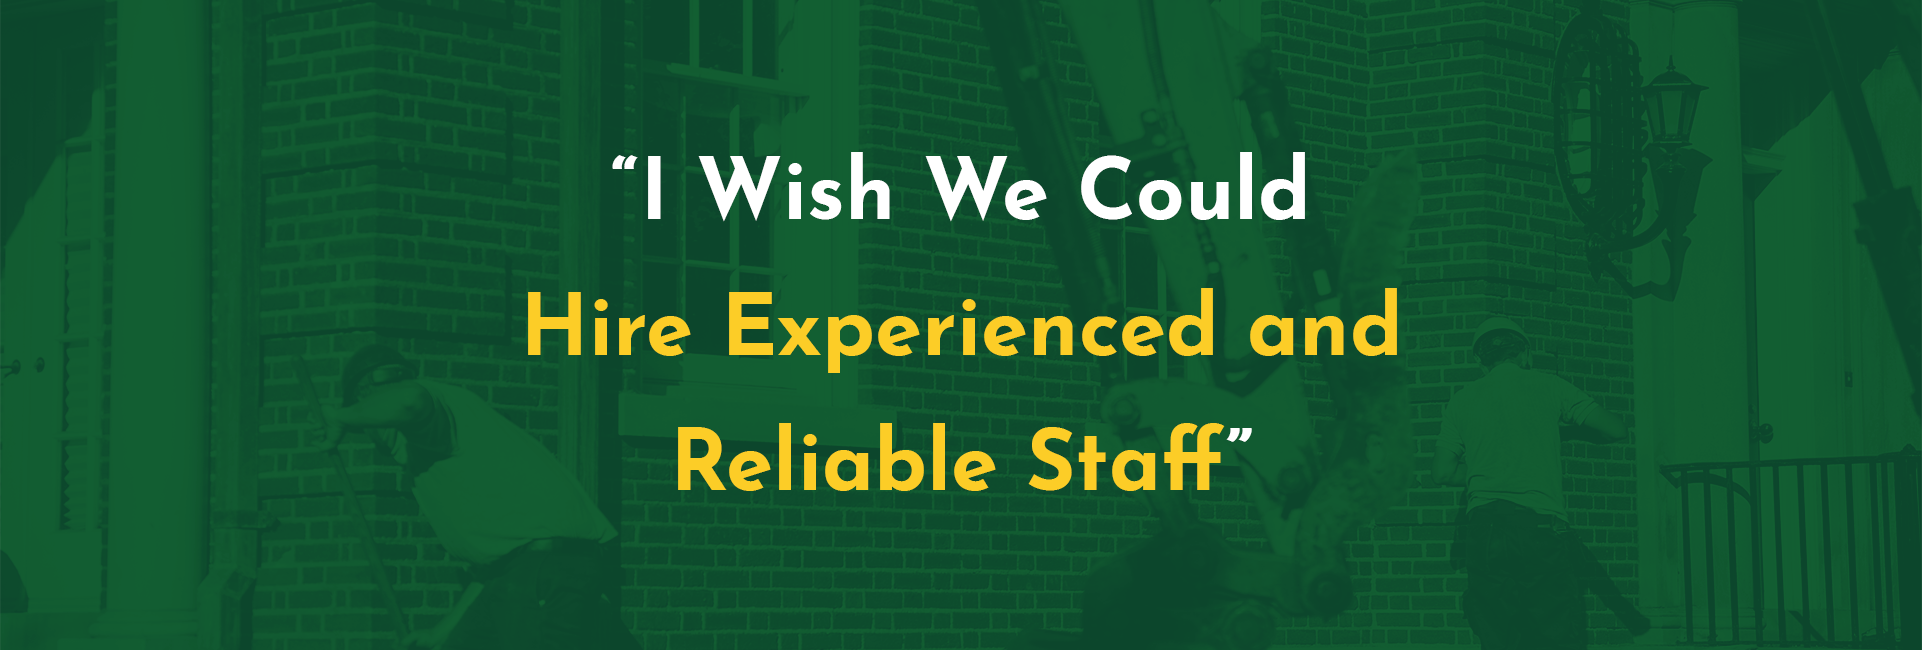 “I Wish We Could Hire Experienced and Reliable Staff”